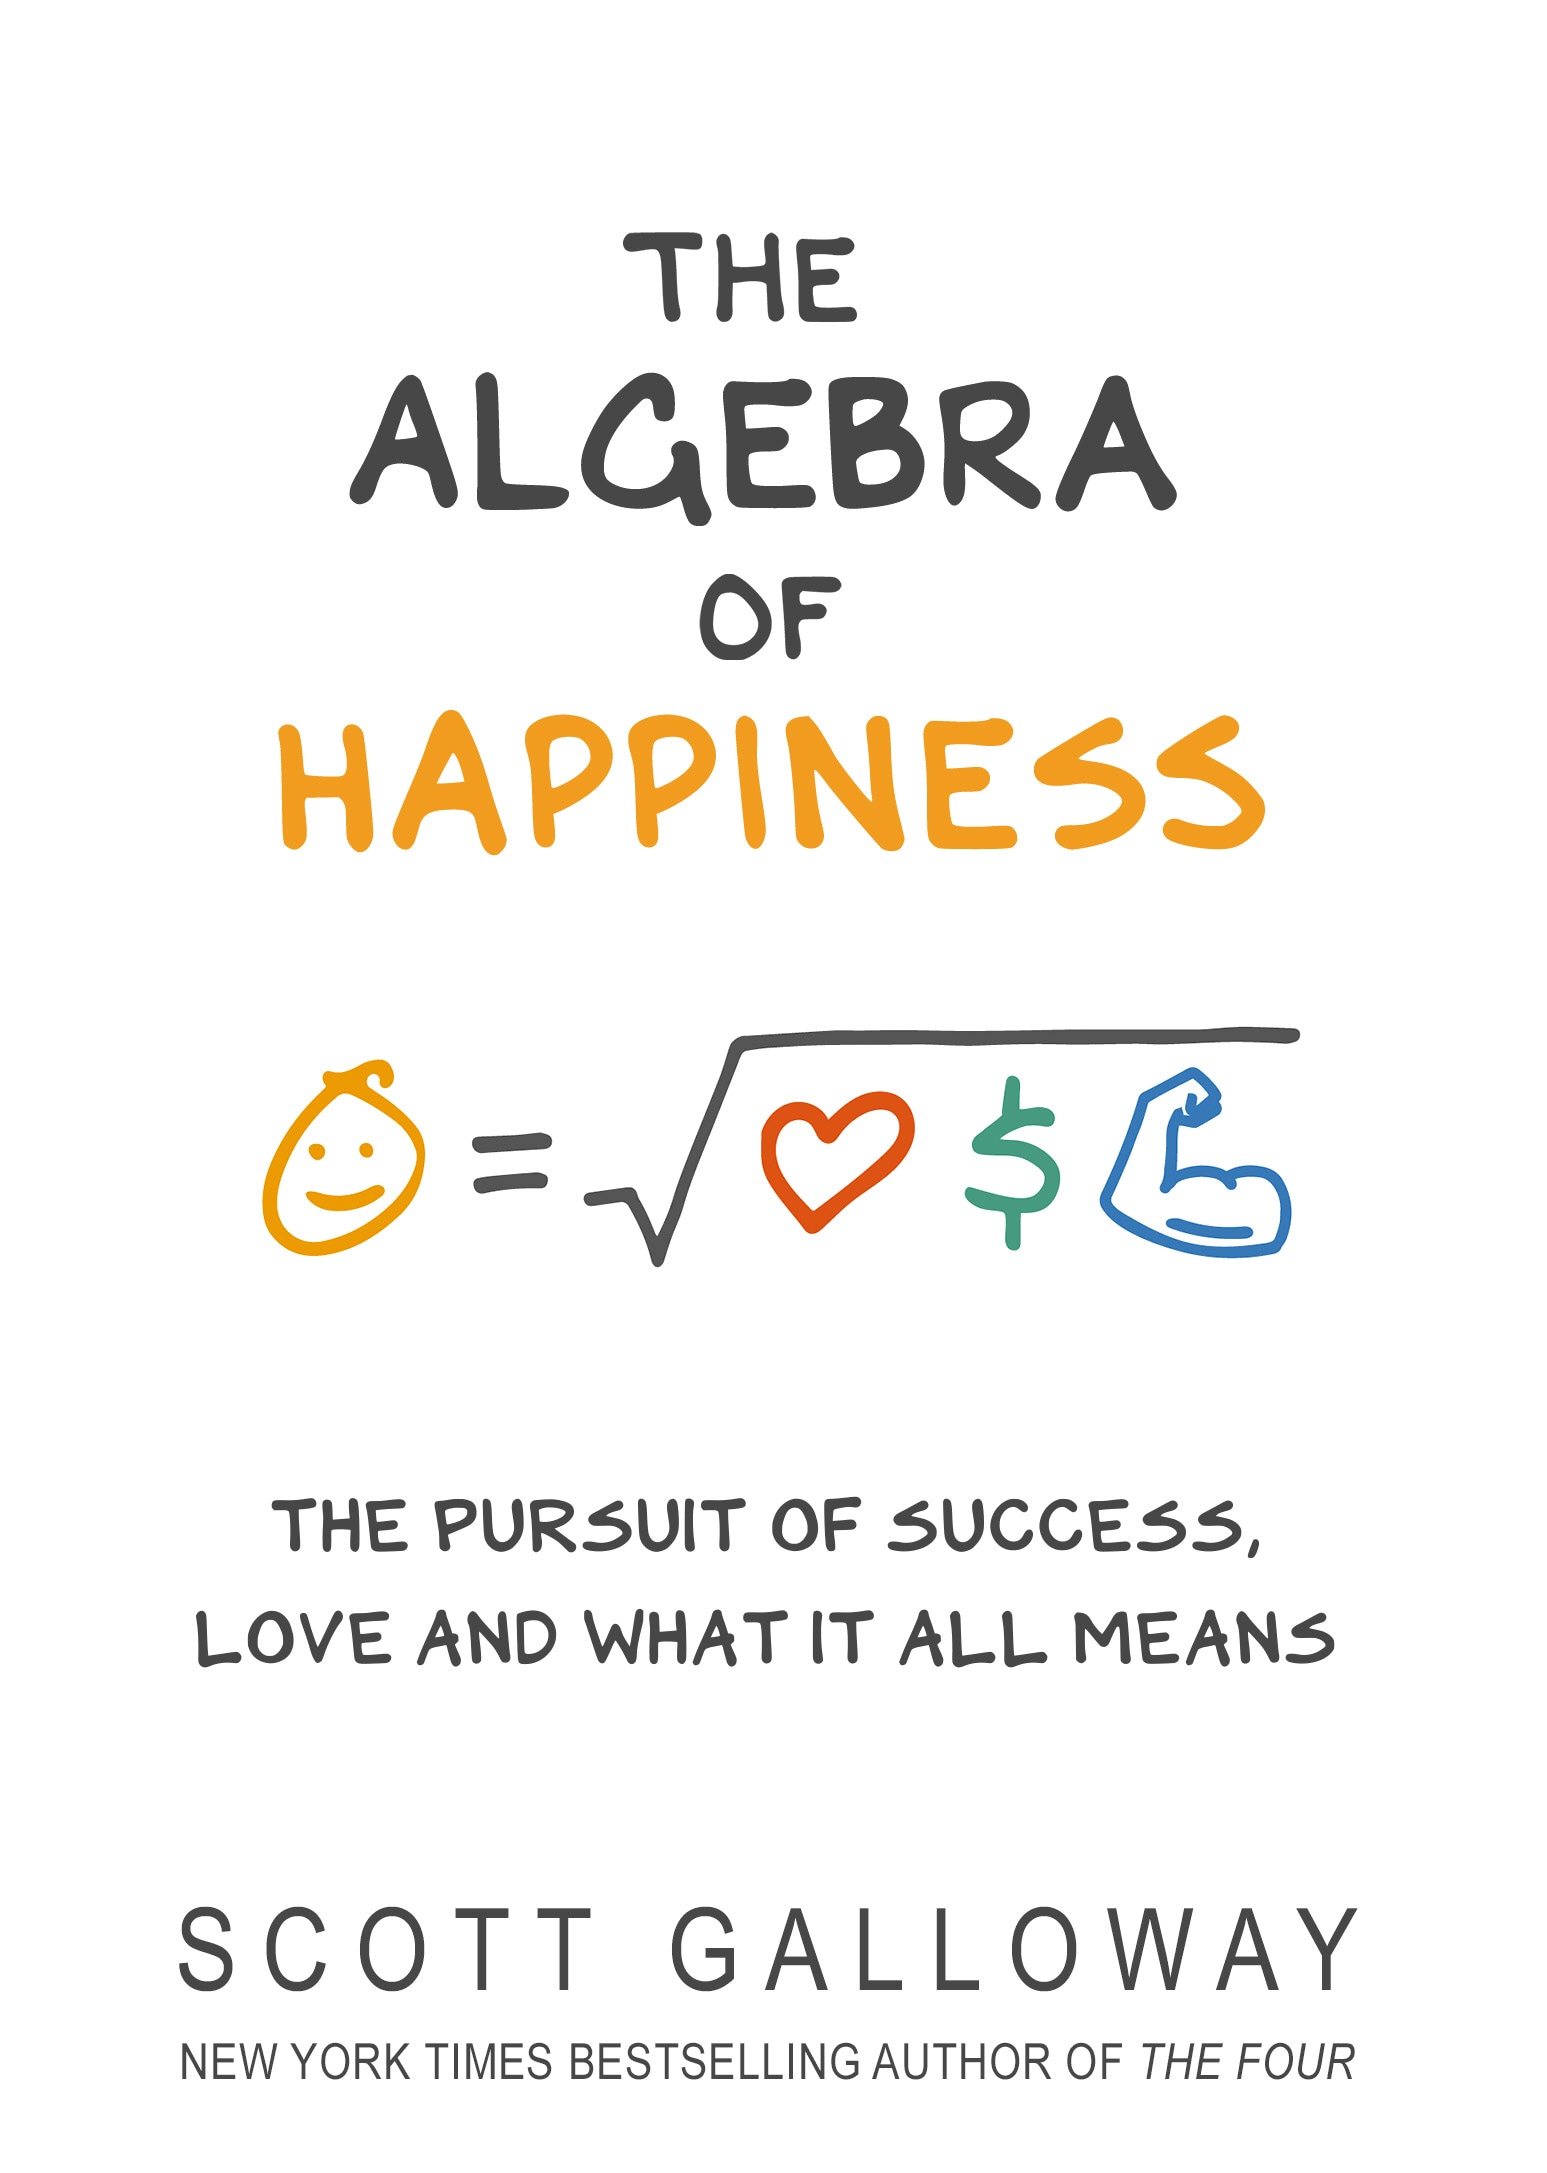 Book “The Algebra of Happiness” by Scott Galloway — December 31, 2020